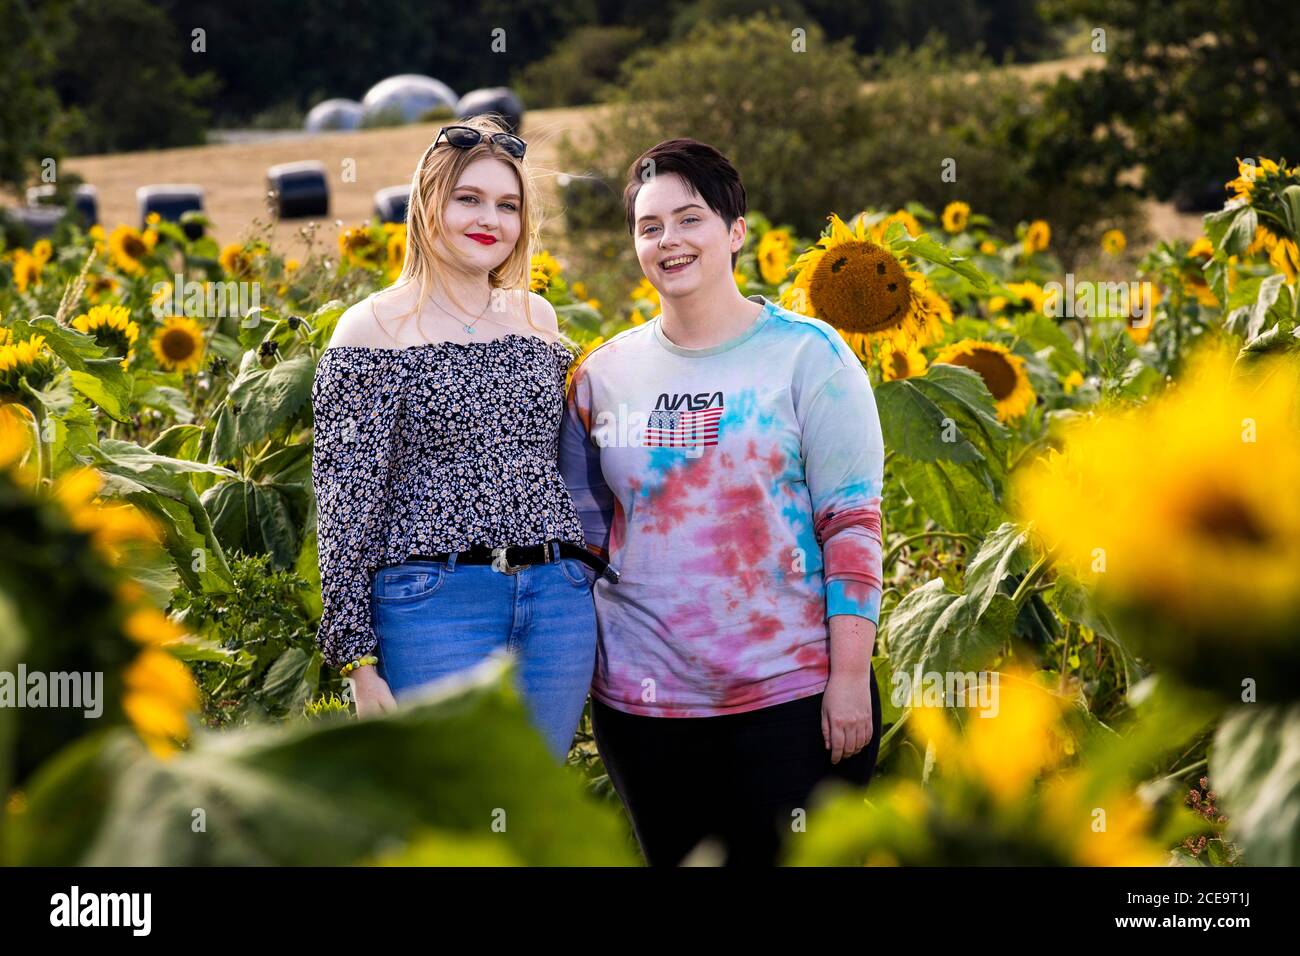 Lauren Robb (left) and Catherine Crozier from Belfast pictured together during a day trip at the Sunflower Field Portglenone, on Bank Holiday Monday in Northern Ireland. The Sunflower Field is grow annually and the owners asking for a small fee to enter with proceeds this year for Versus Arthritis. Stock Photo